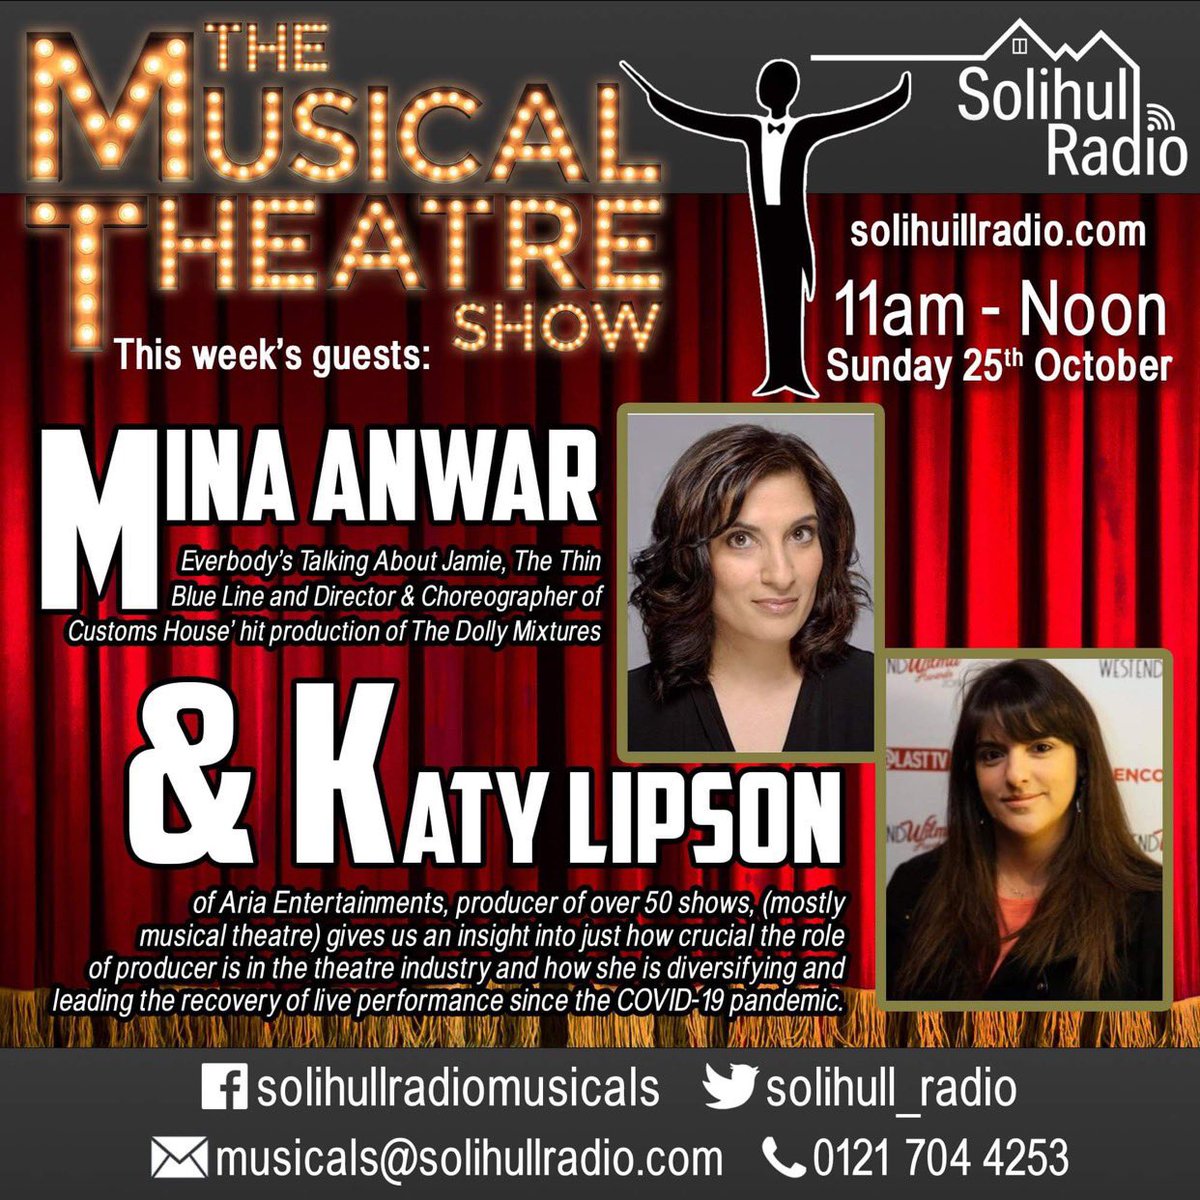 I’m on here live tomorrow morning talking about being Director snd choreographer of The Dolly Mixtures musical by John Miles and @tomkelly60  @thecustomshouse and other fab musical theatre things. Playing songs from last year’s smash hit revival. @rayspencermbe #regionaltheatre